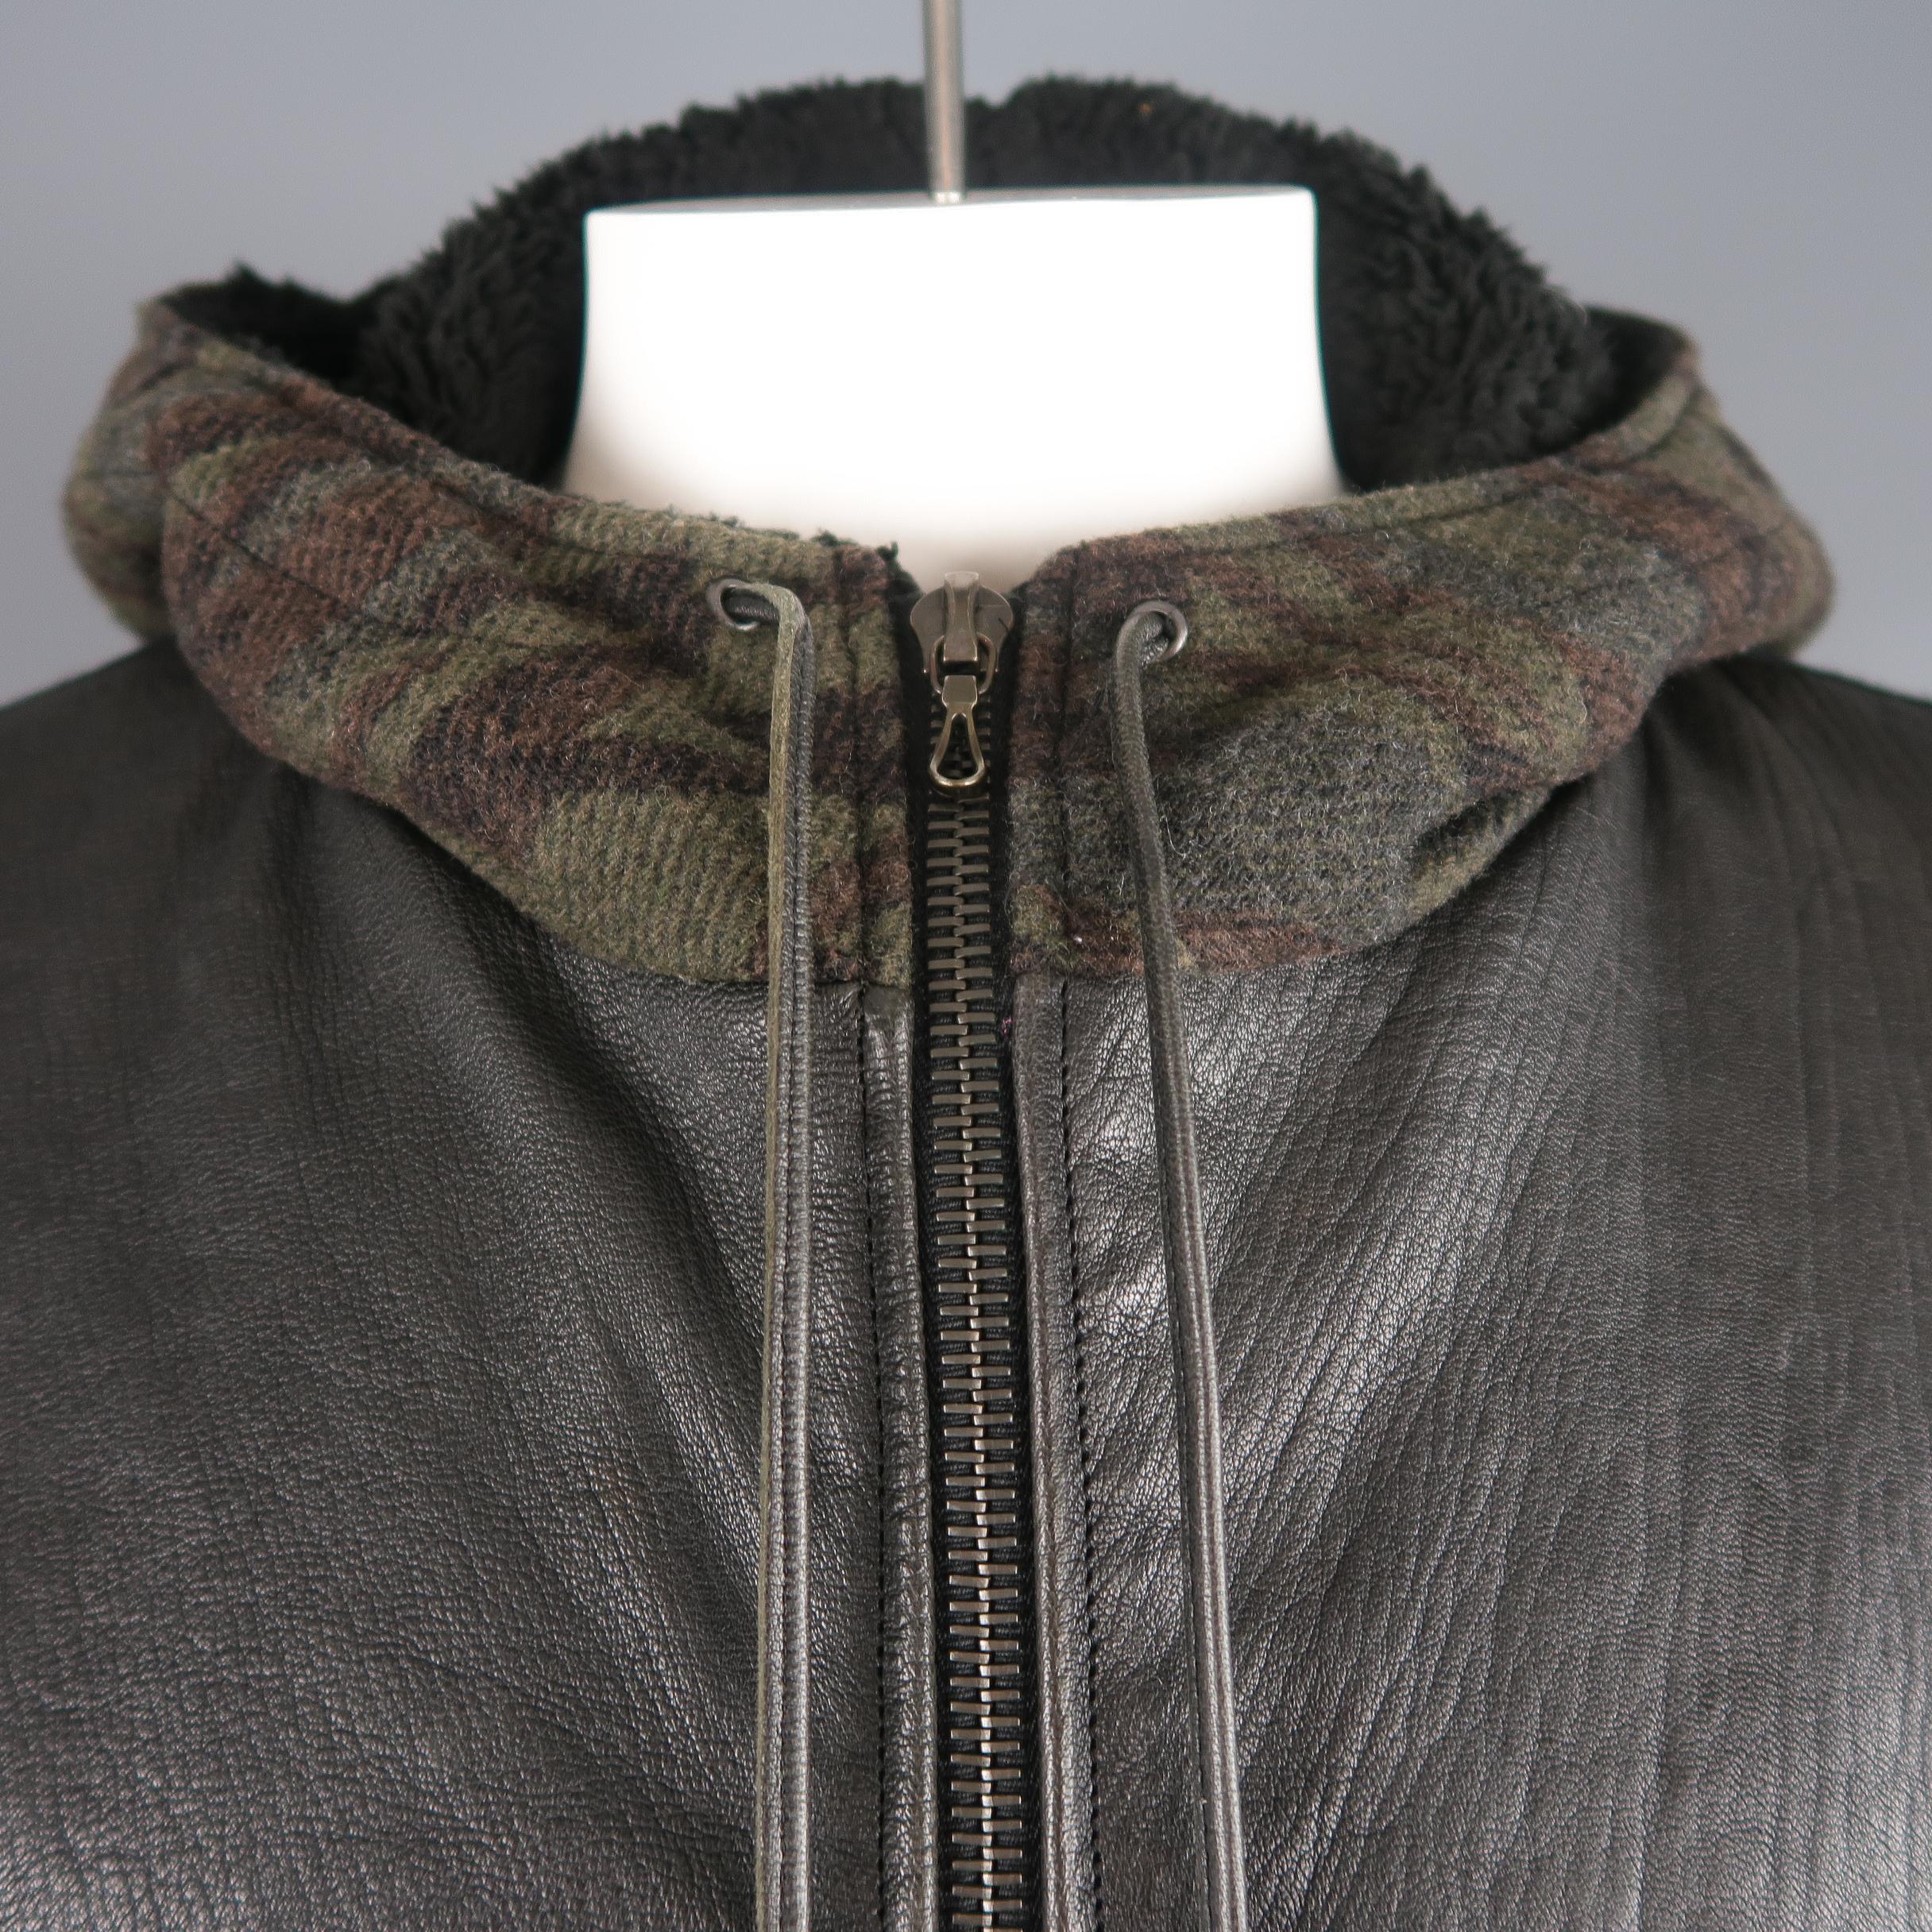 Shellac jacket comes in black jersey knit with a black leather frontal panel, camouflage knit pocket panel, and faux shearling lined hood. Made in Japan.
 
Good Pre-Owned Condition.
Marked: IT 50
 
Measurements:
 
Shoulder: 17 in.
Chest: 44